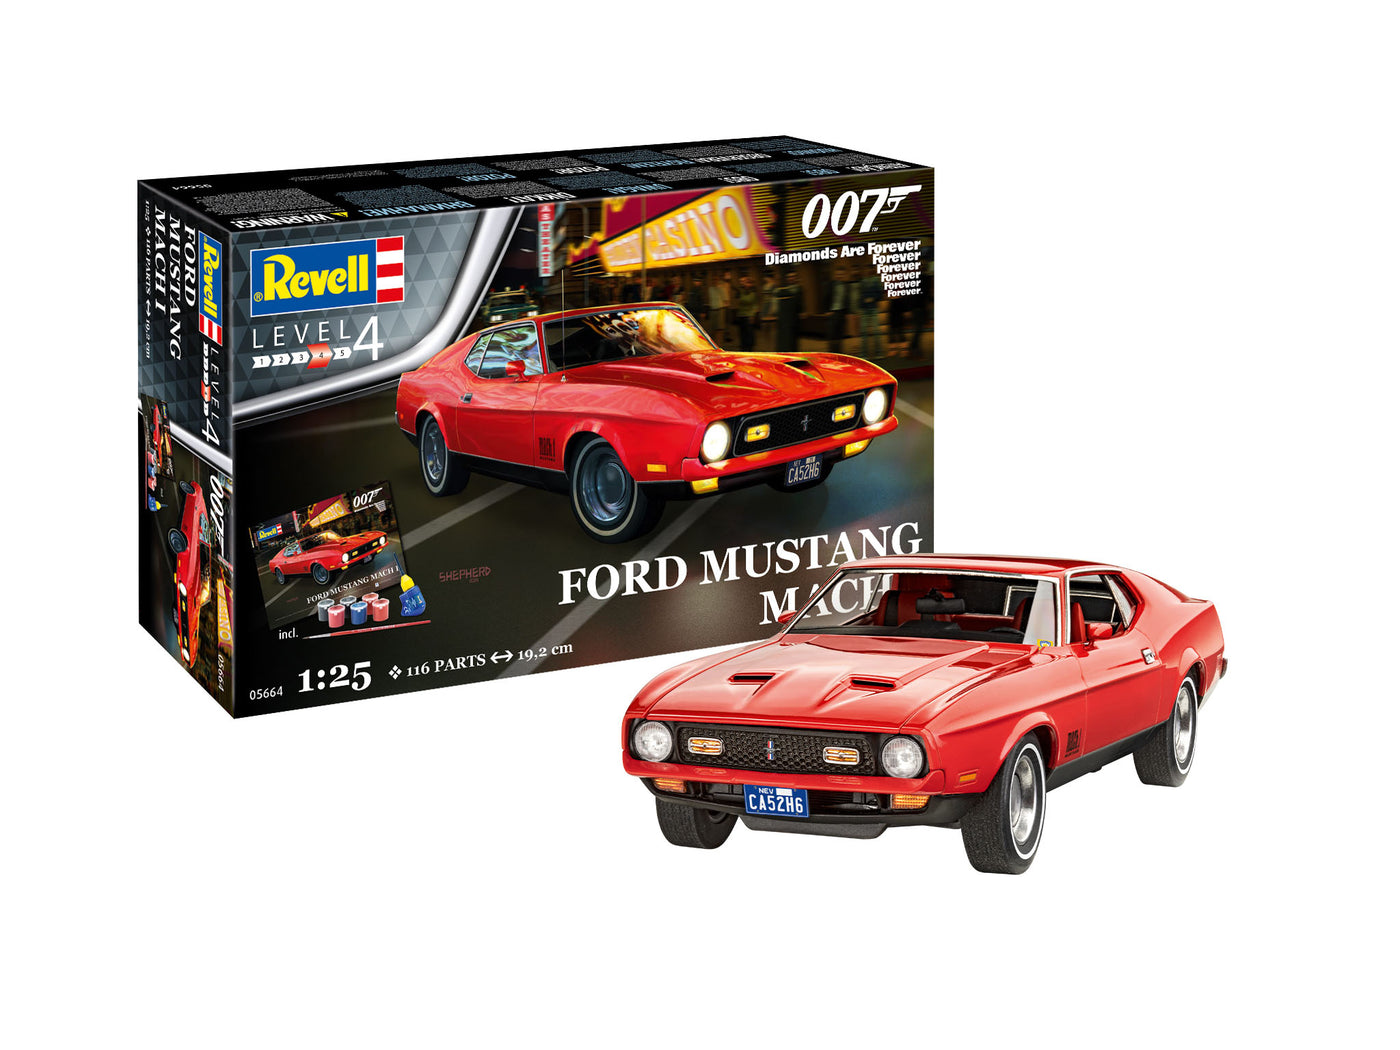 1/24 James Bond Ford Mustang Diamonds are Forever